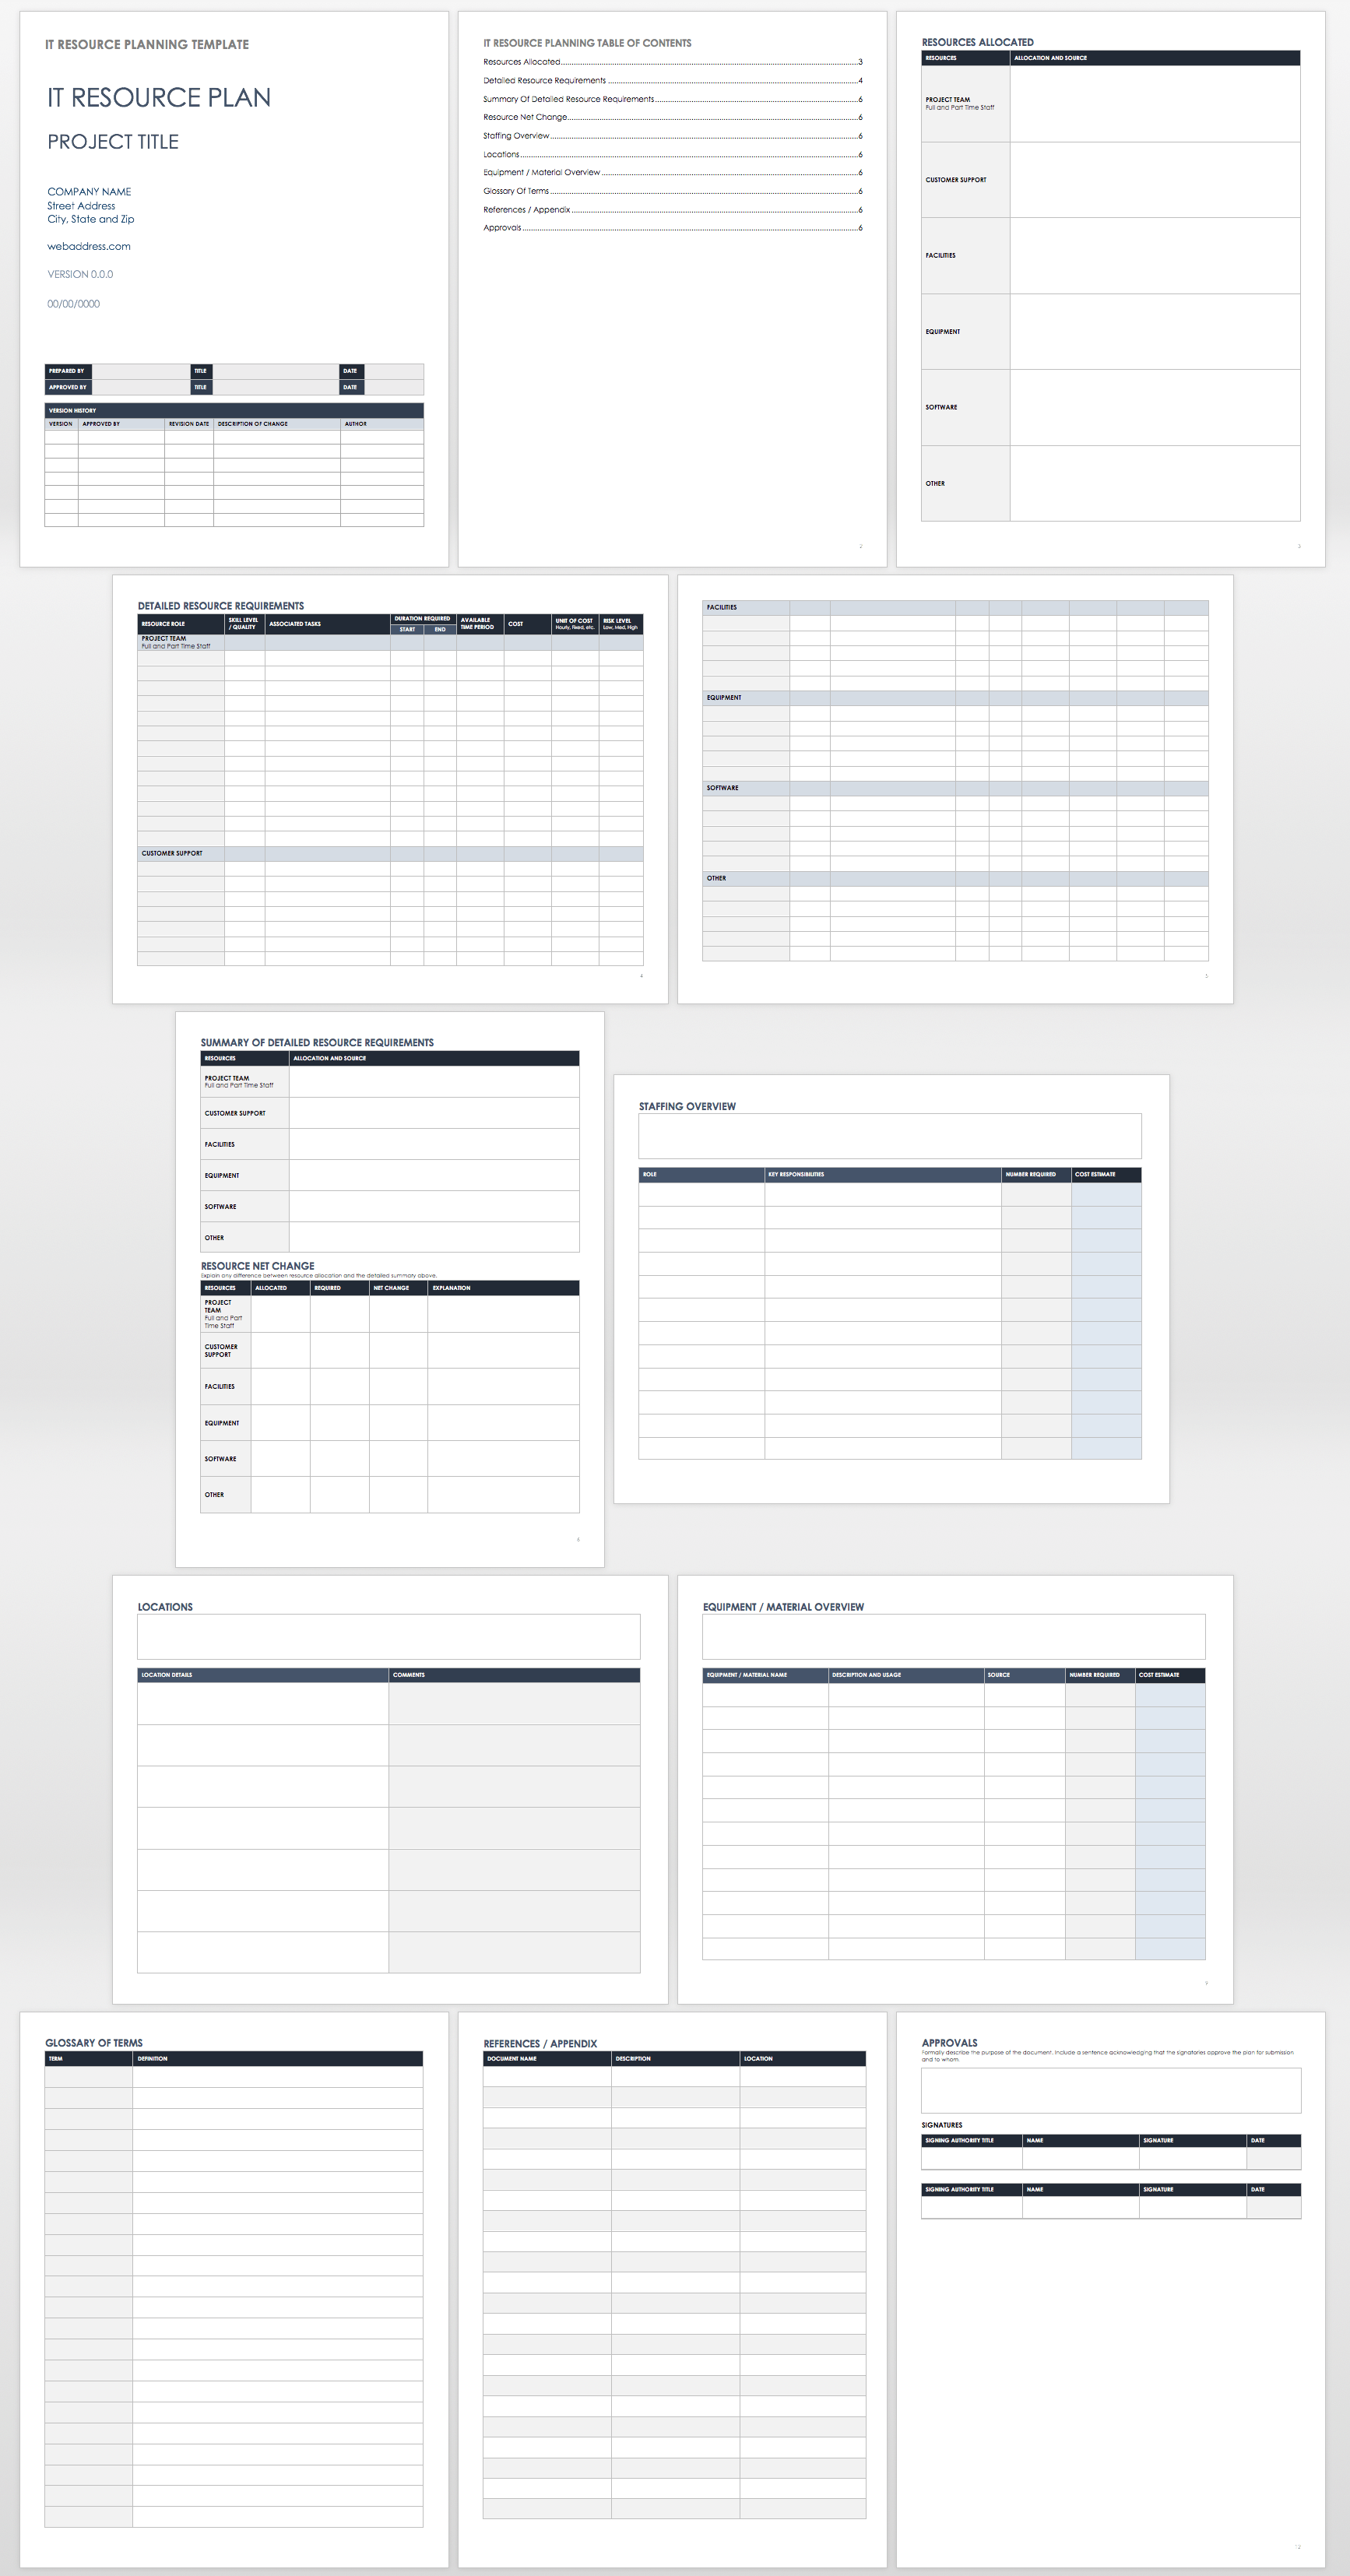 IT Resource Planning Template